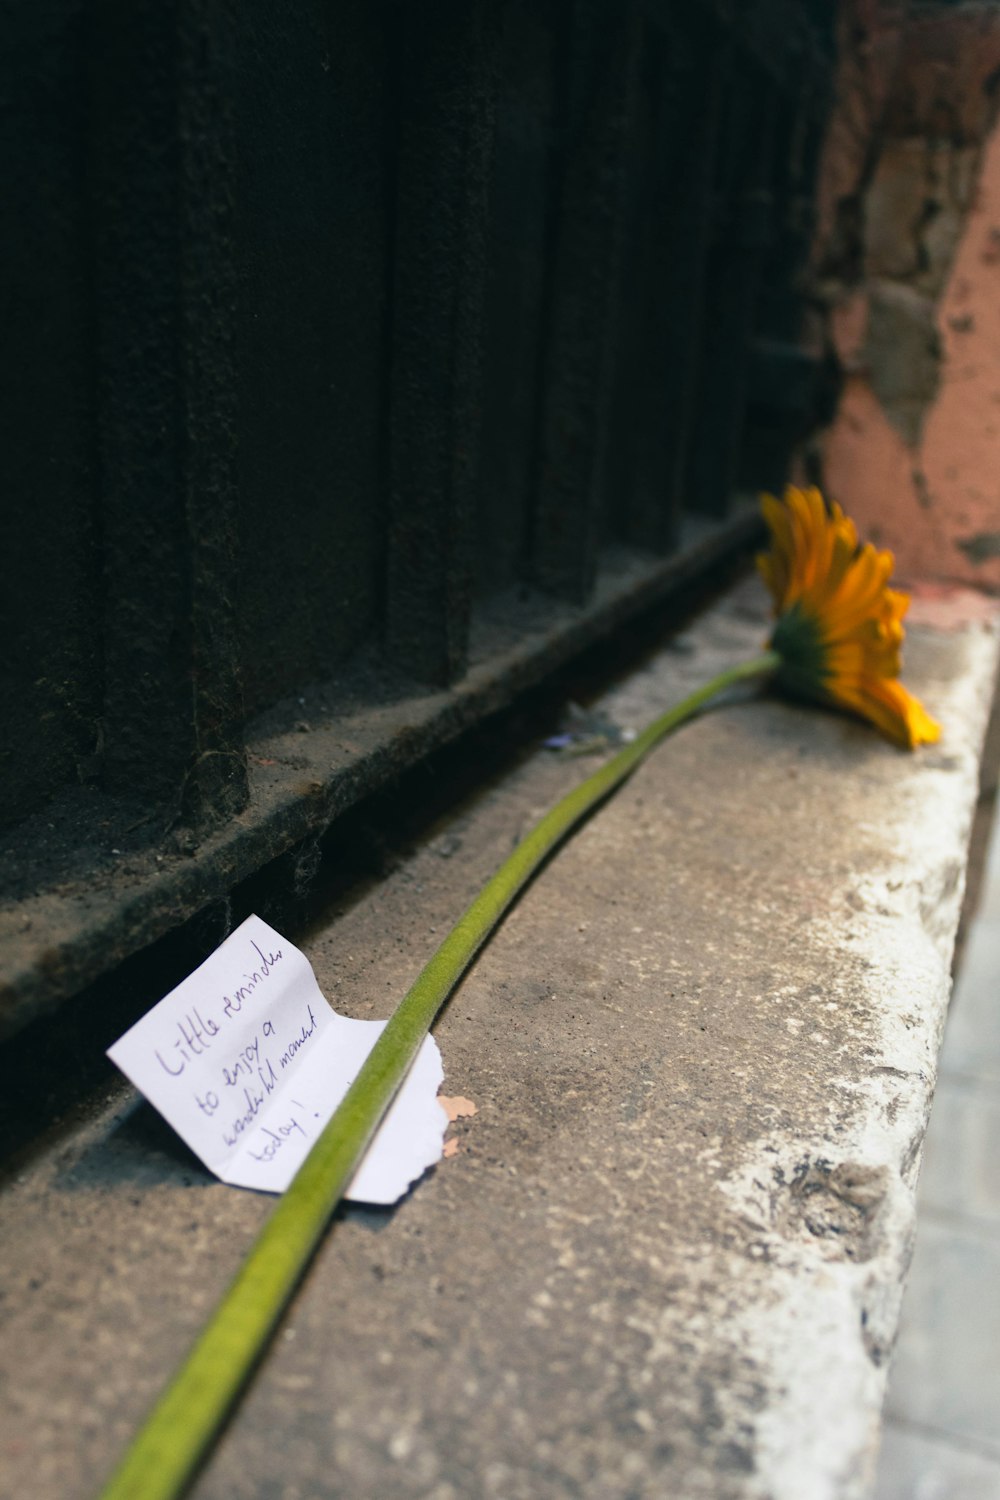 a note left on the ground next to a flower